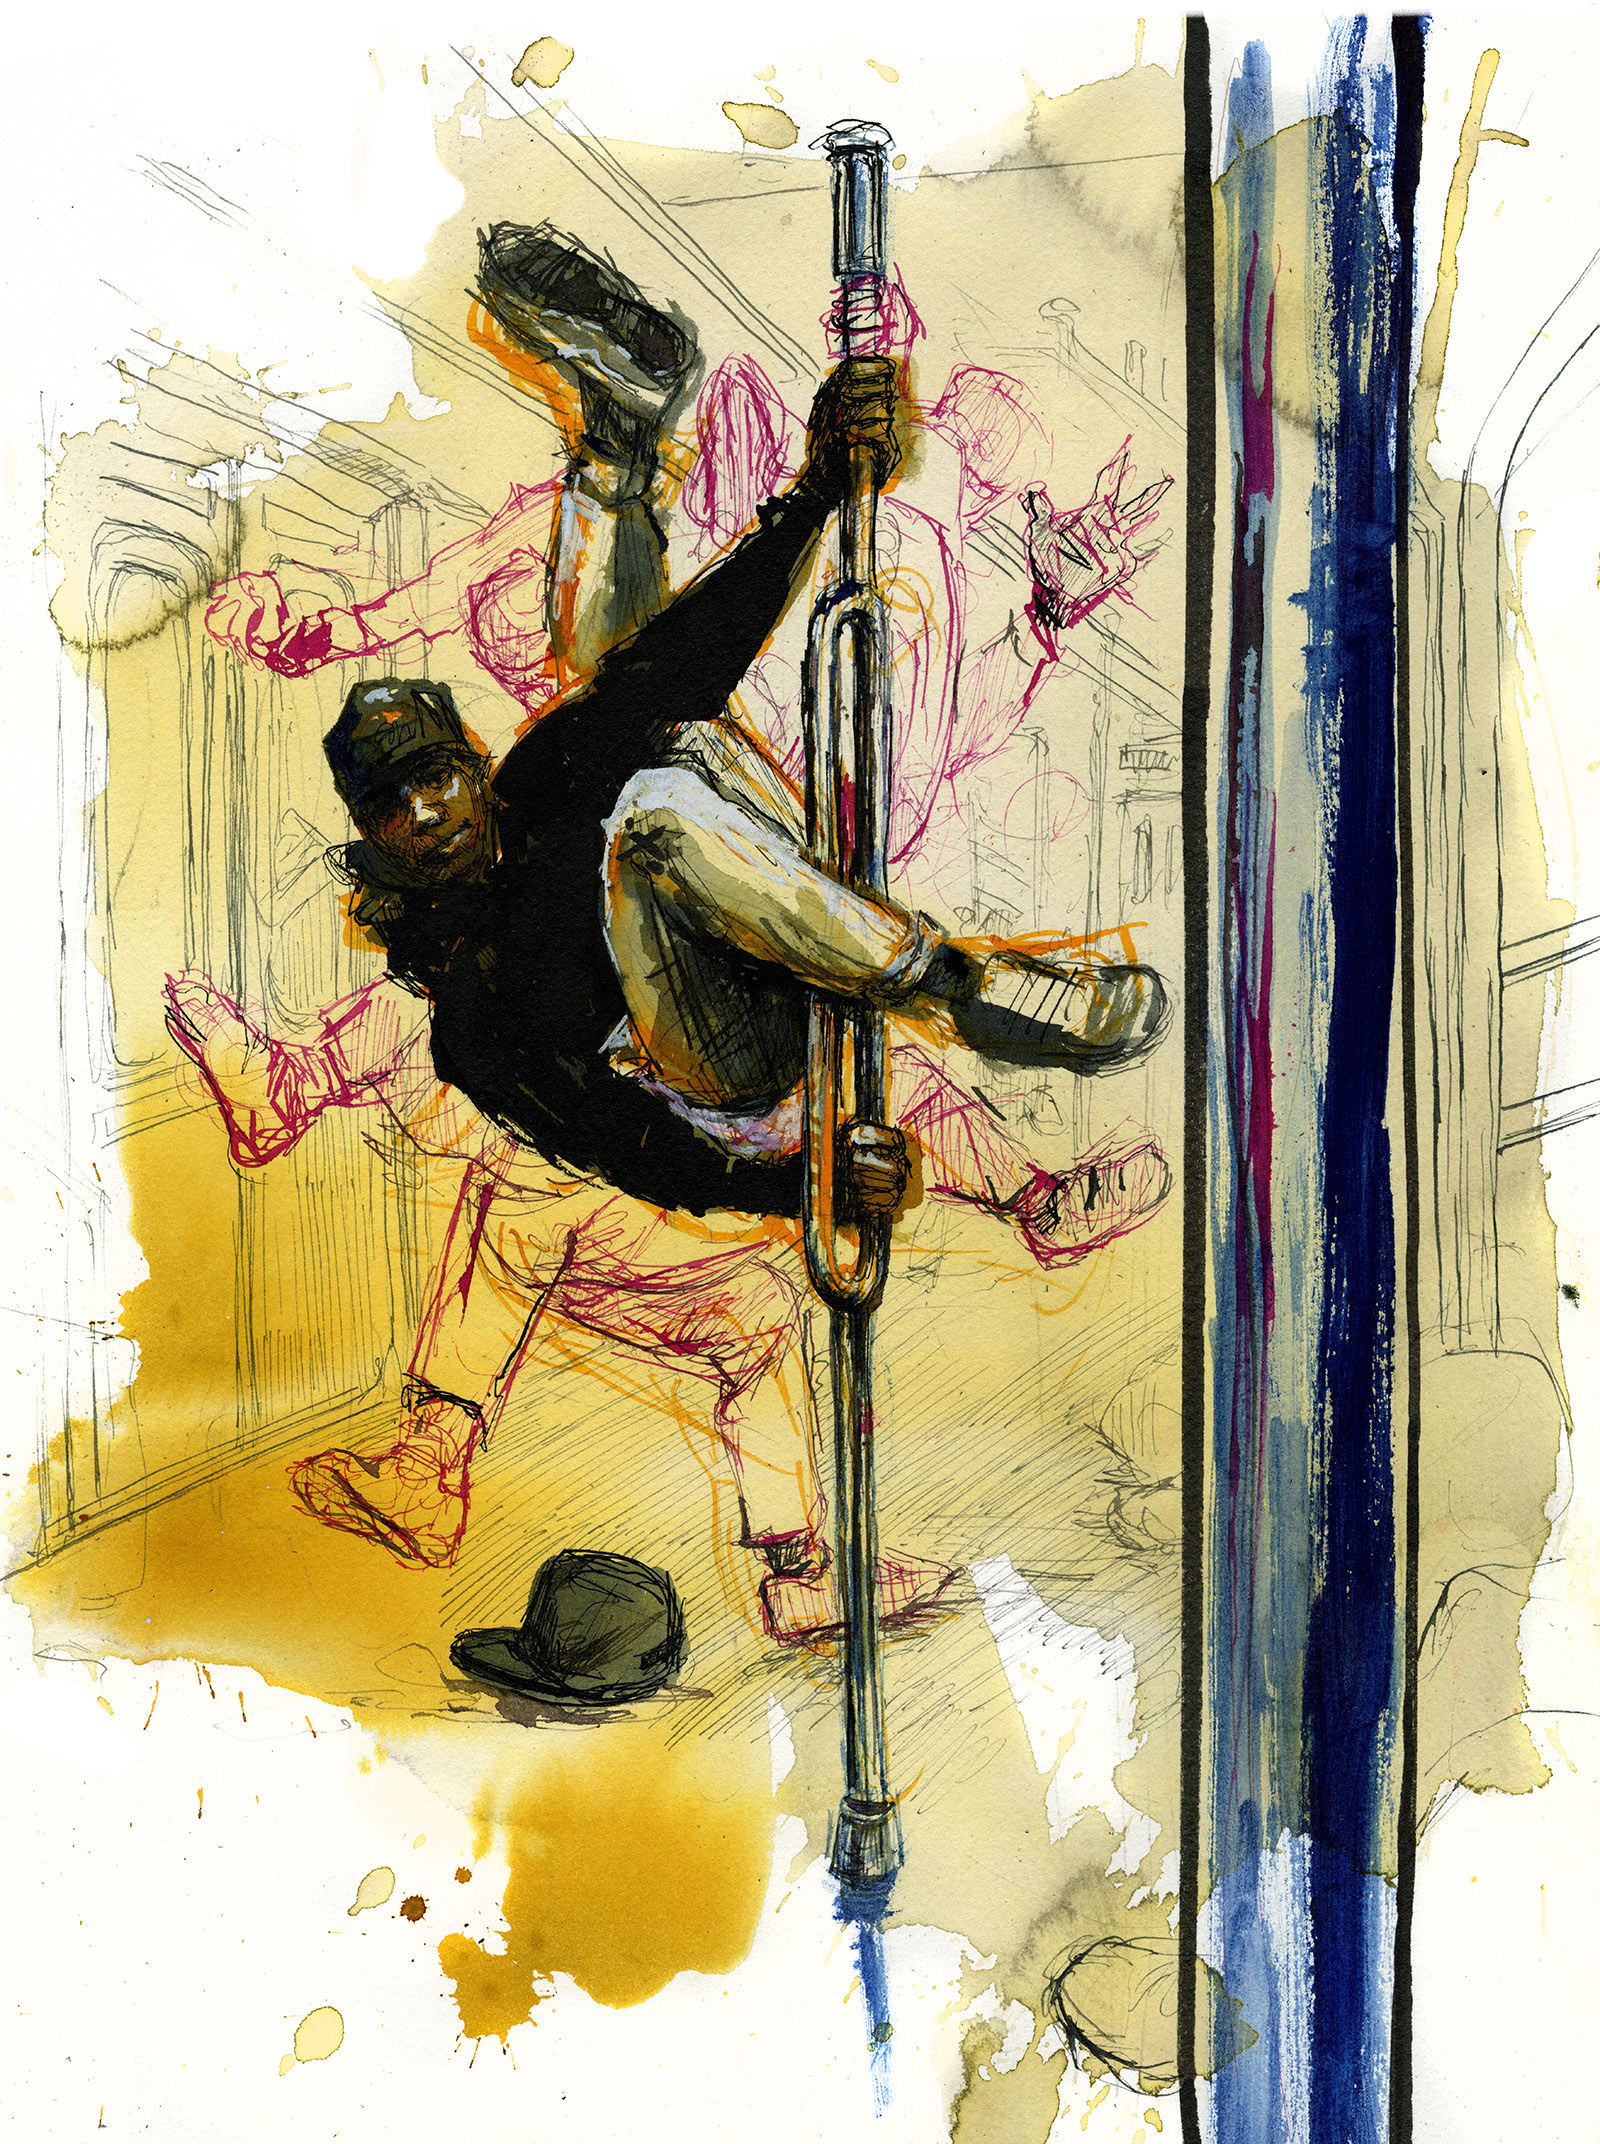 A watercolor illustration shows a man swinging on subway pole